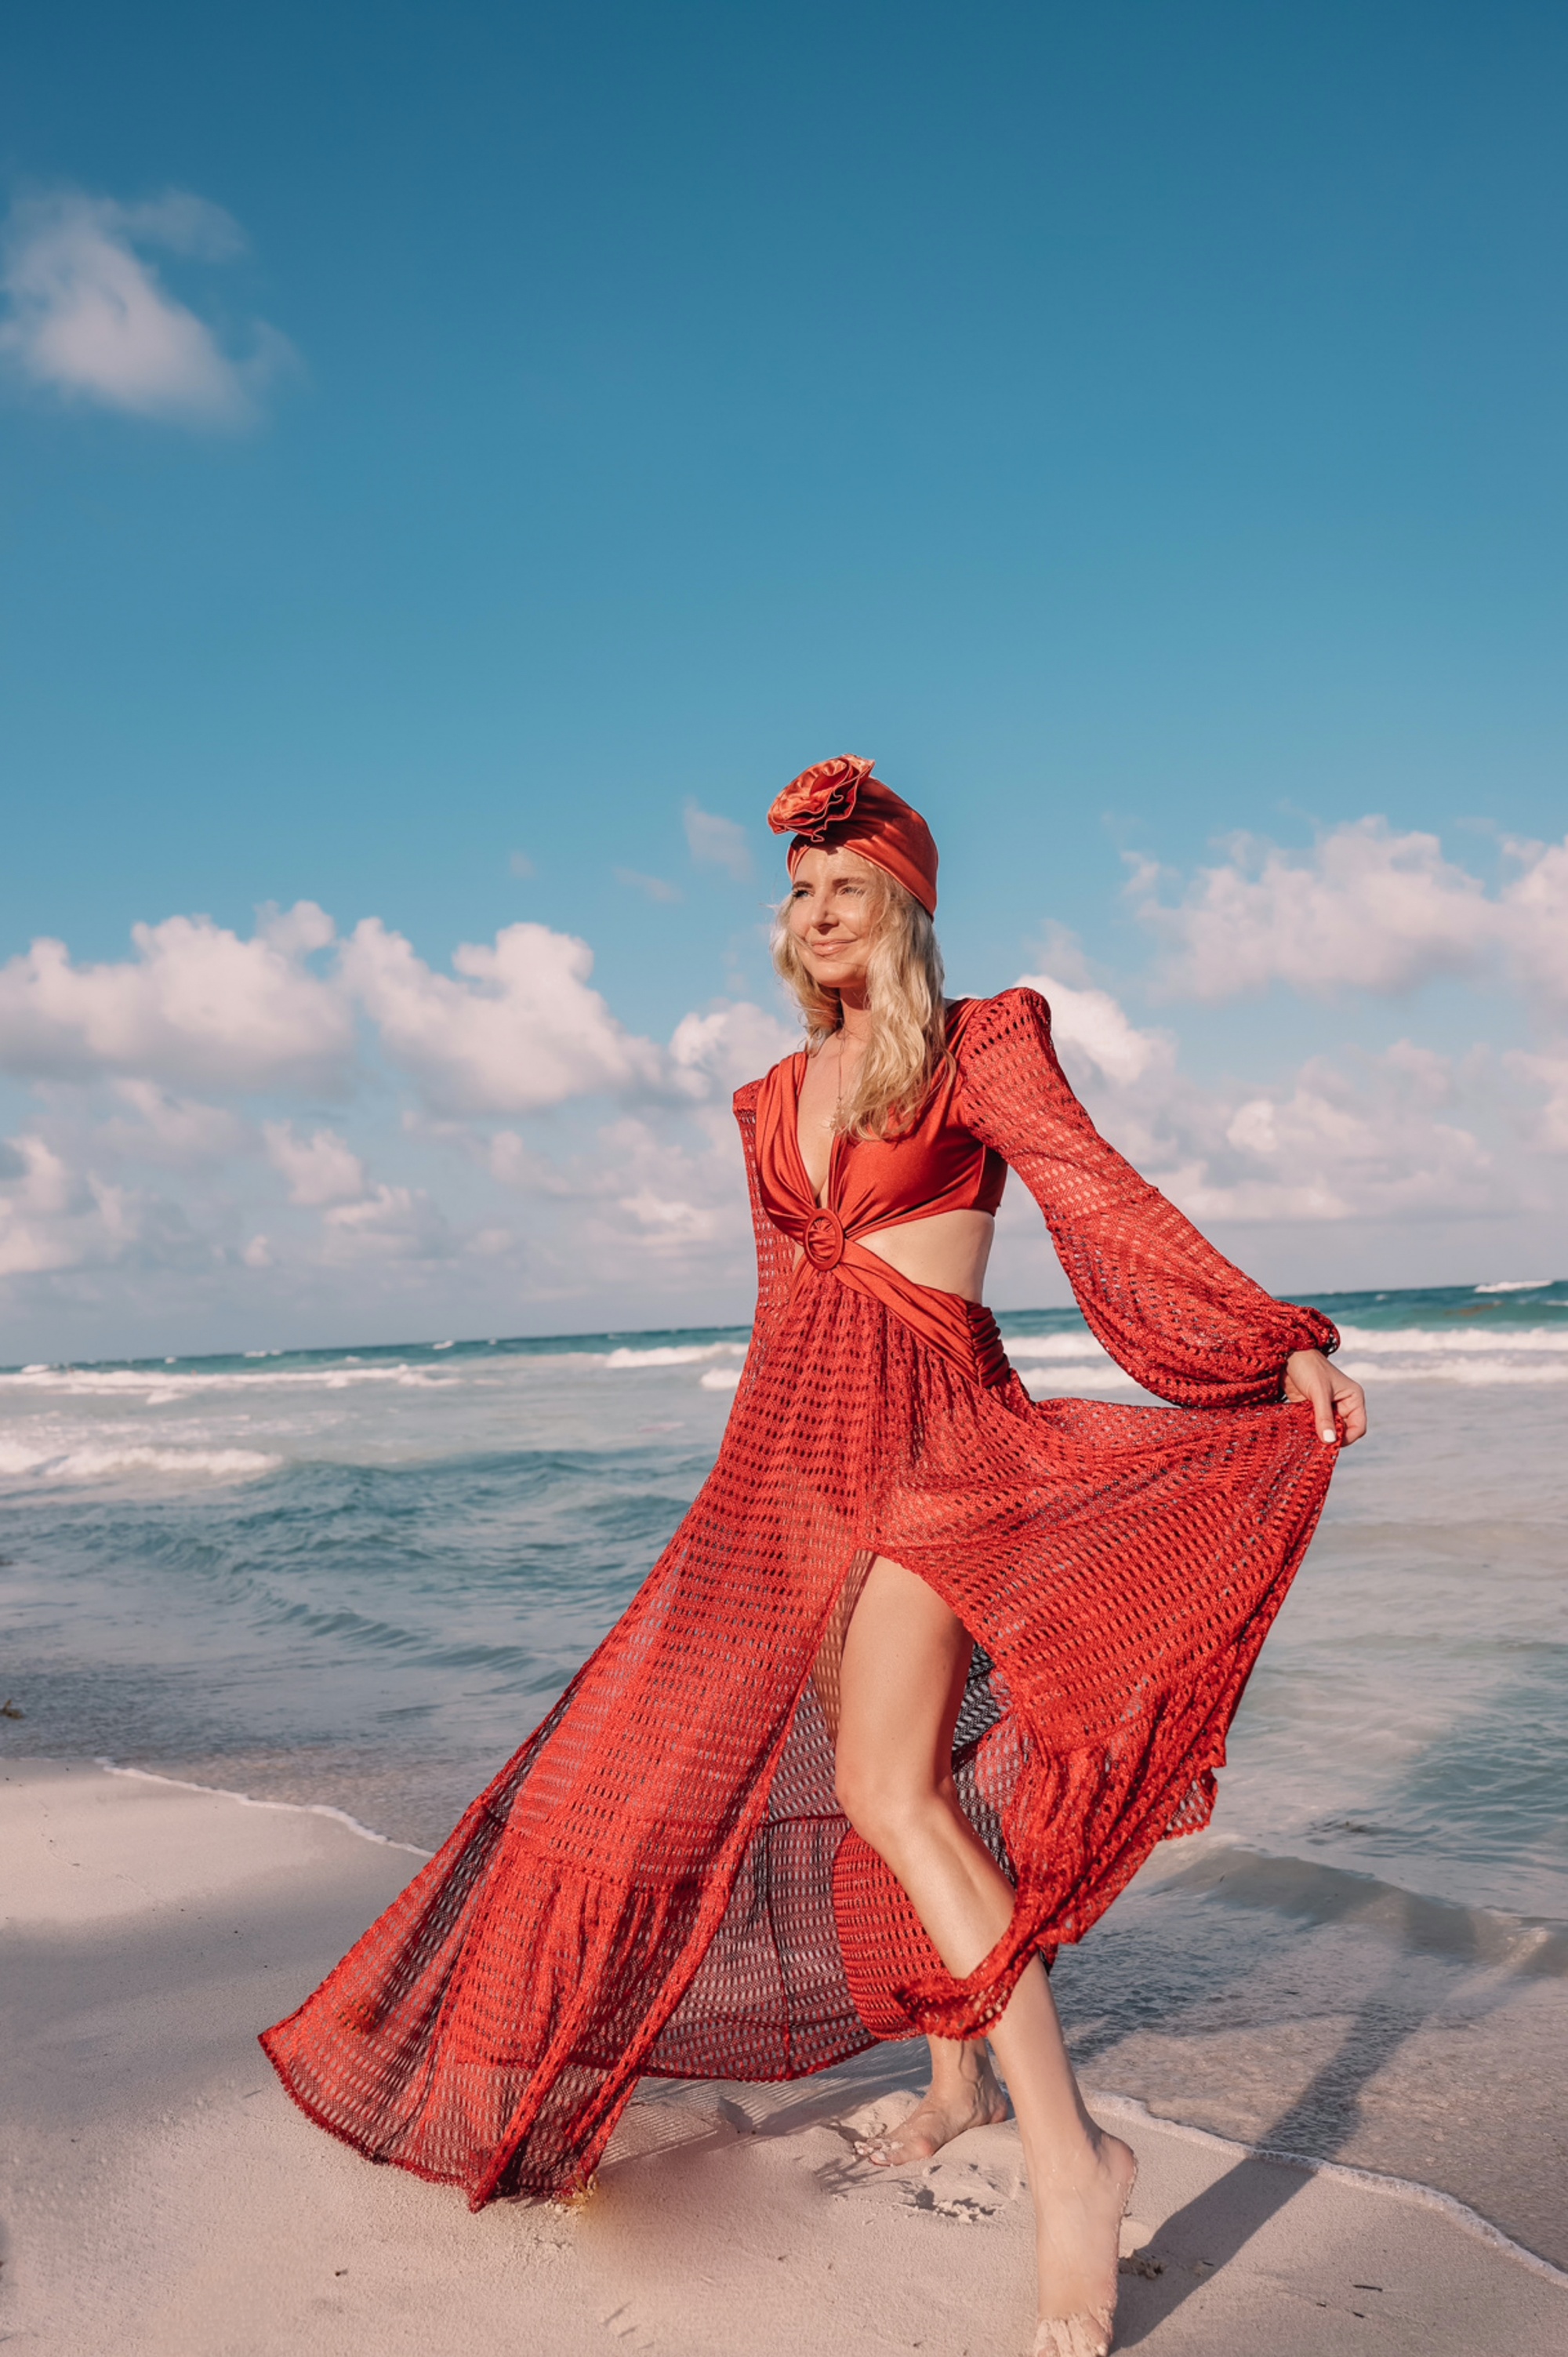 maxi dress by Patbo for the beach in crochet fabric and rust color in Tulum Mexico on fashion over 40 blogger Erin Busbee, maxi dresses, killer maxi dresses, sexy maxi dresses